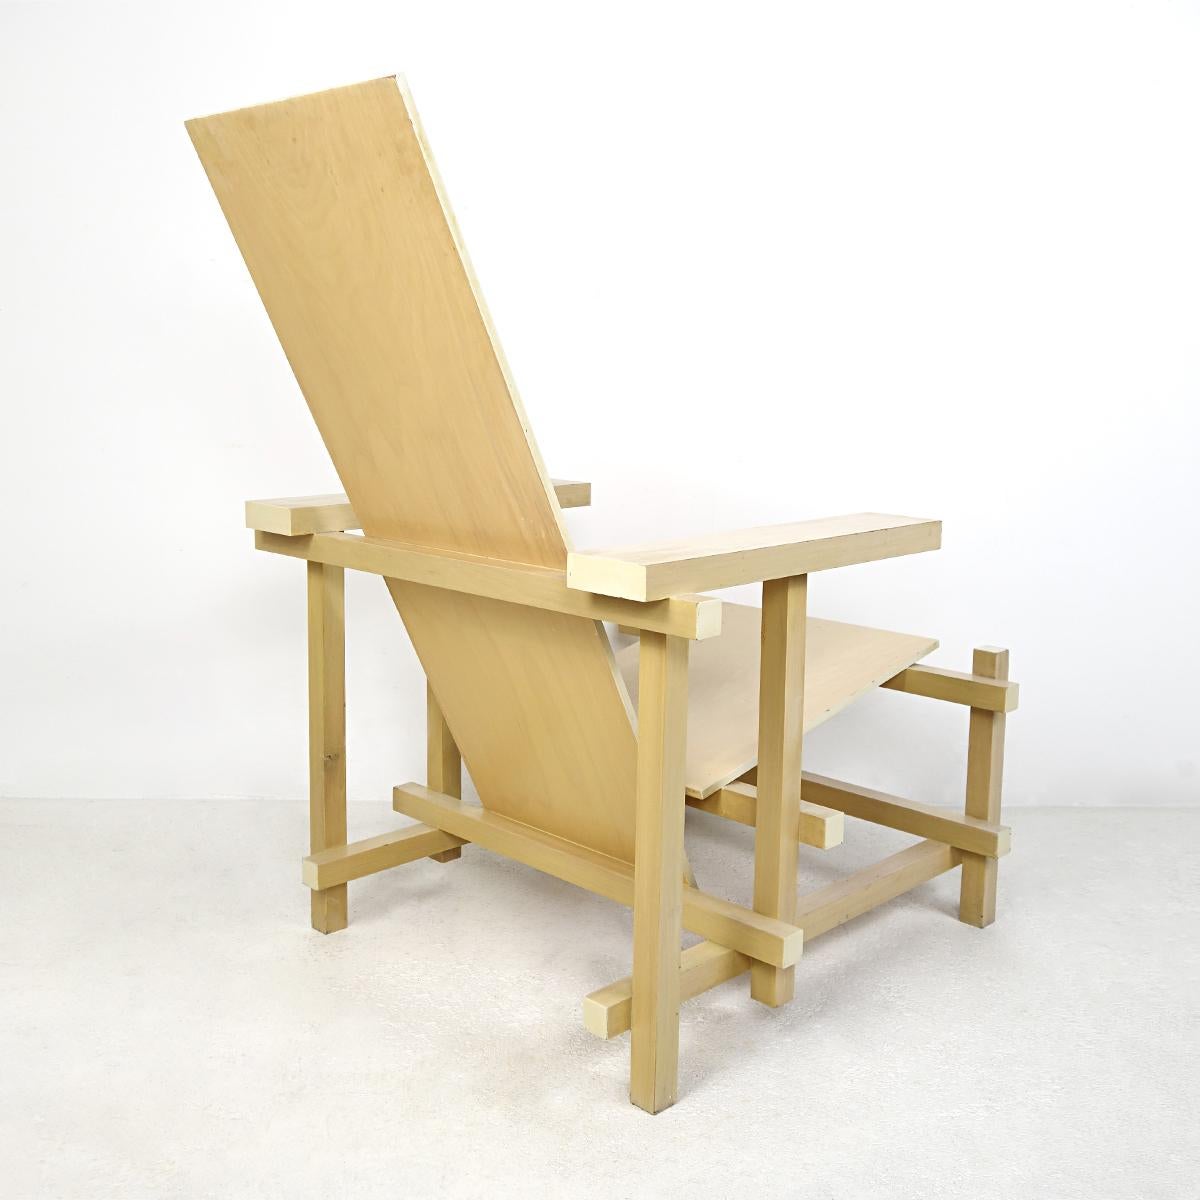 Modernist Chair Made of Uncolored Lacquered Wood after Gerrit Rietveld's Design 1